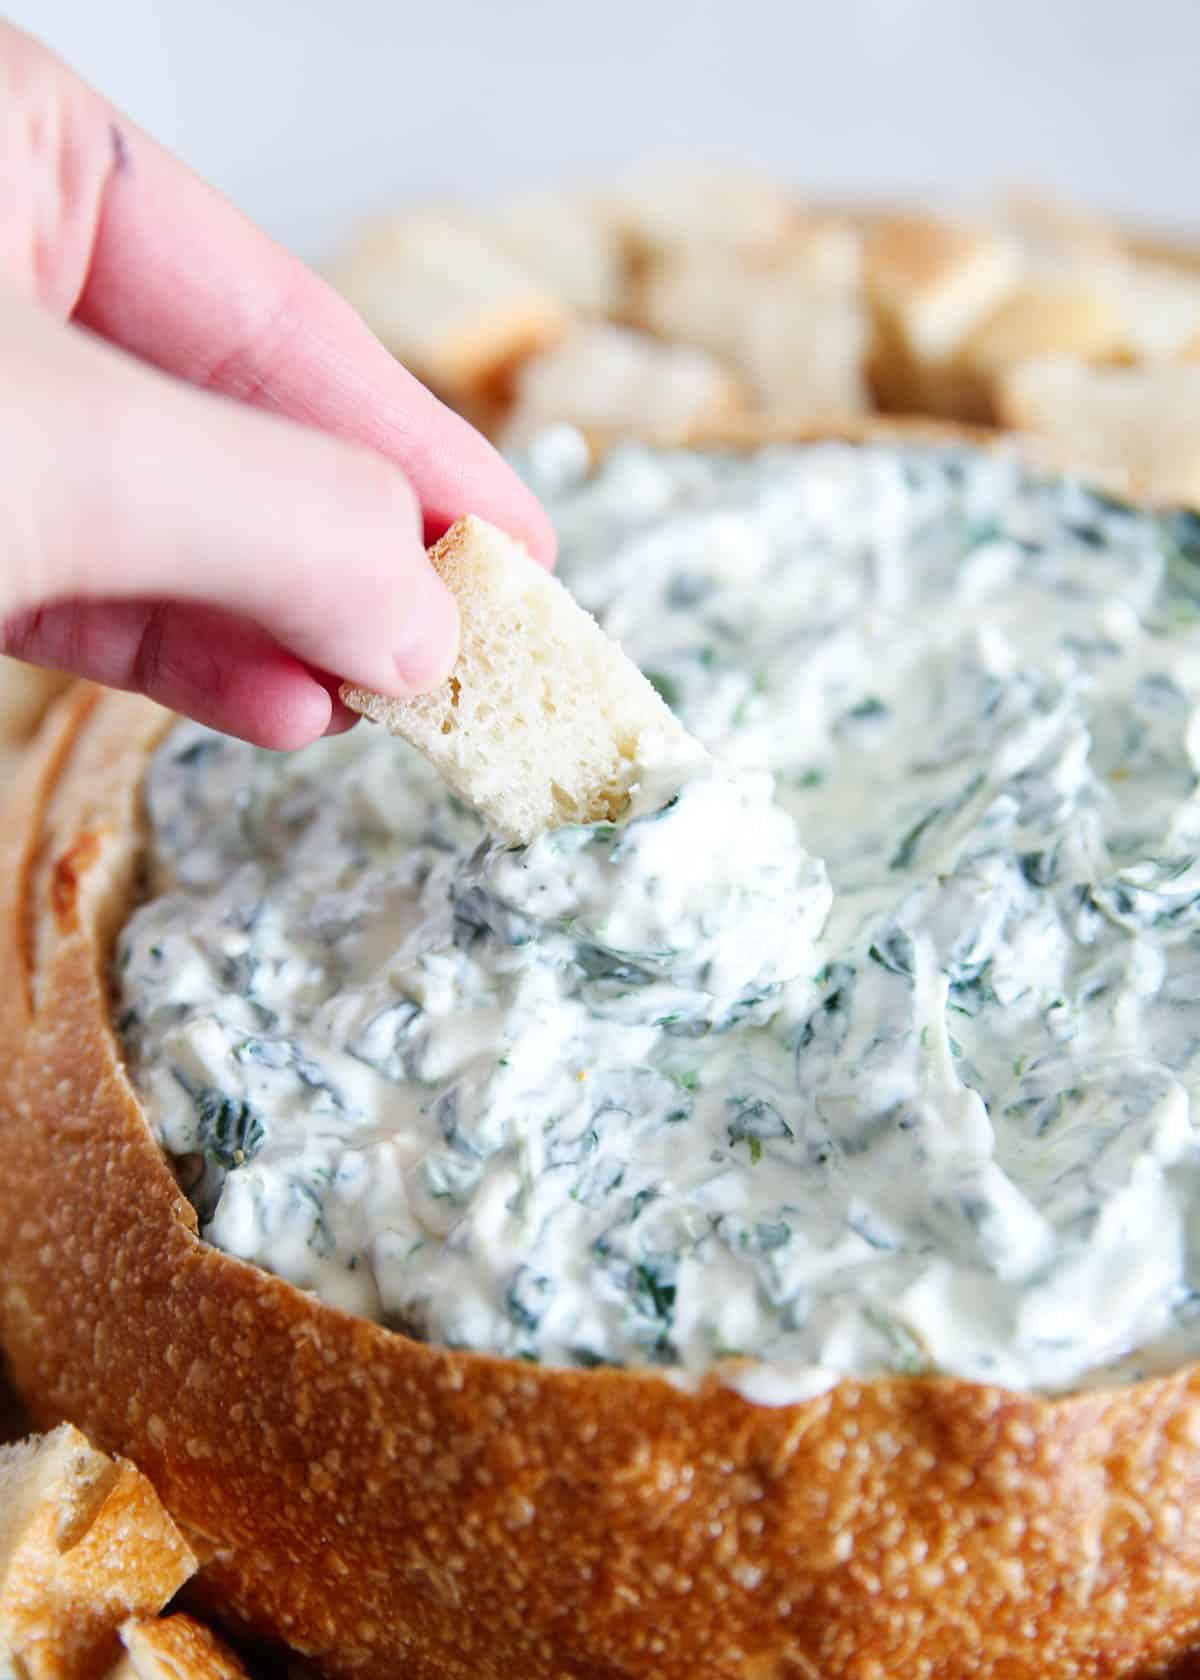 Dipping bread into Knorr spinach dip.